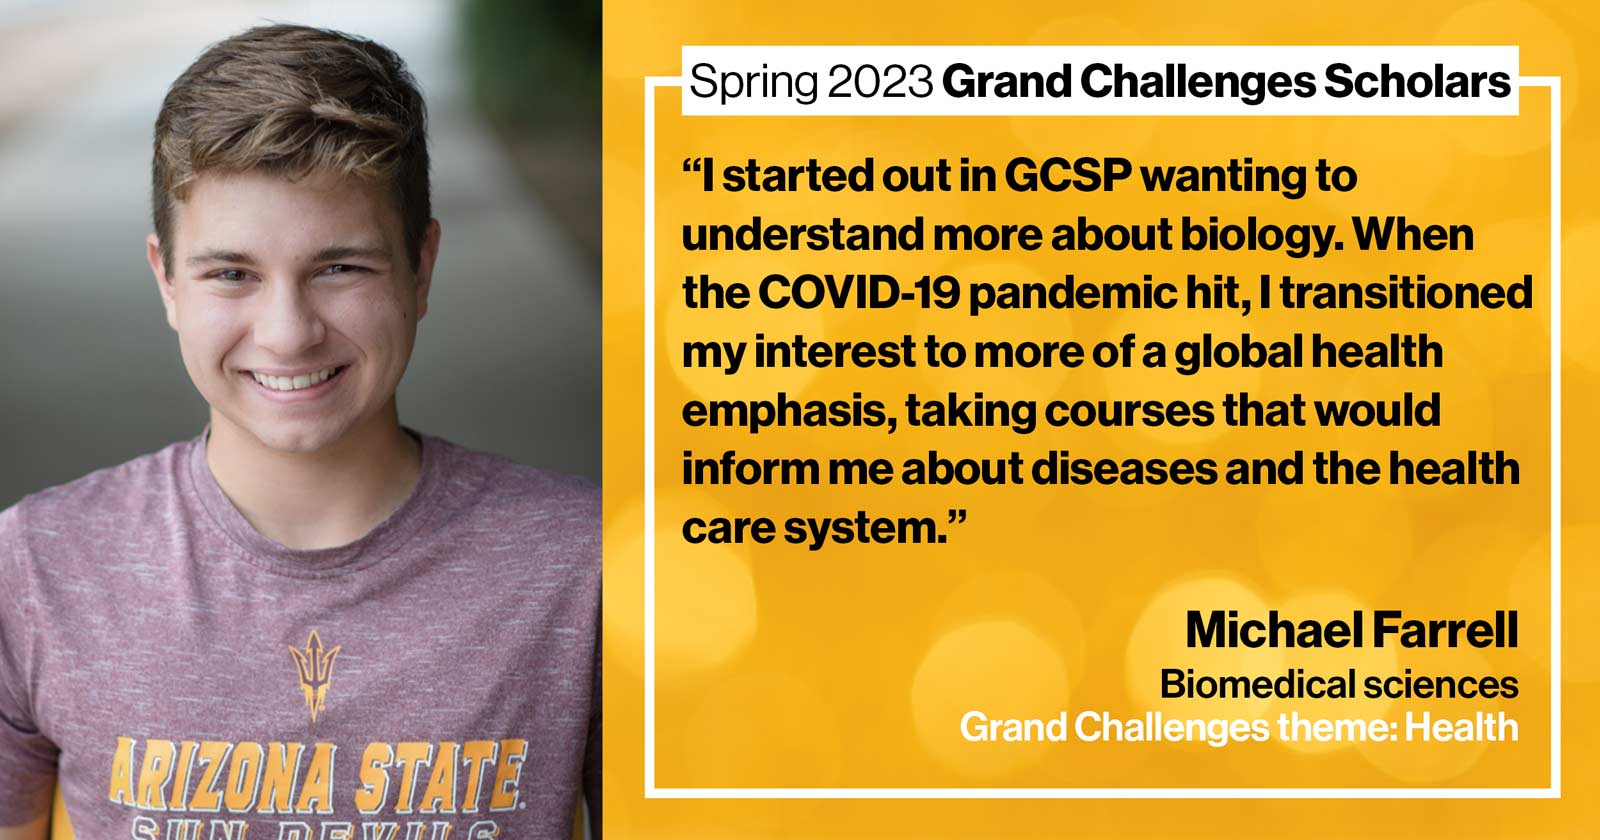 "Michael Farrell Biomedical sciences Grand Challenge: Health Quote: “I started out in GCSP wanting to understand more about biology, then when the COVID-19 pandemic hit, I transitioned my interest to more of a global health emphasis, taking courses that would inform me about diseases and the health care system.”"